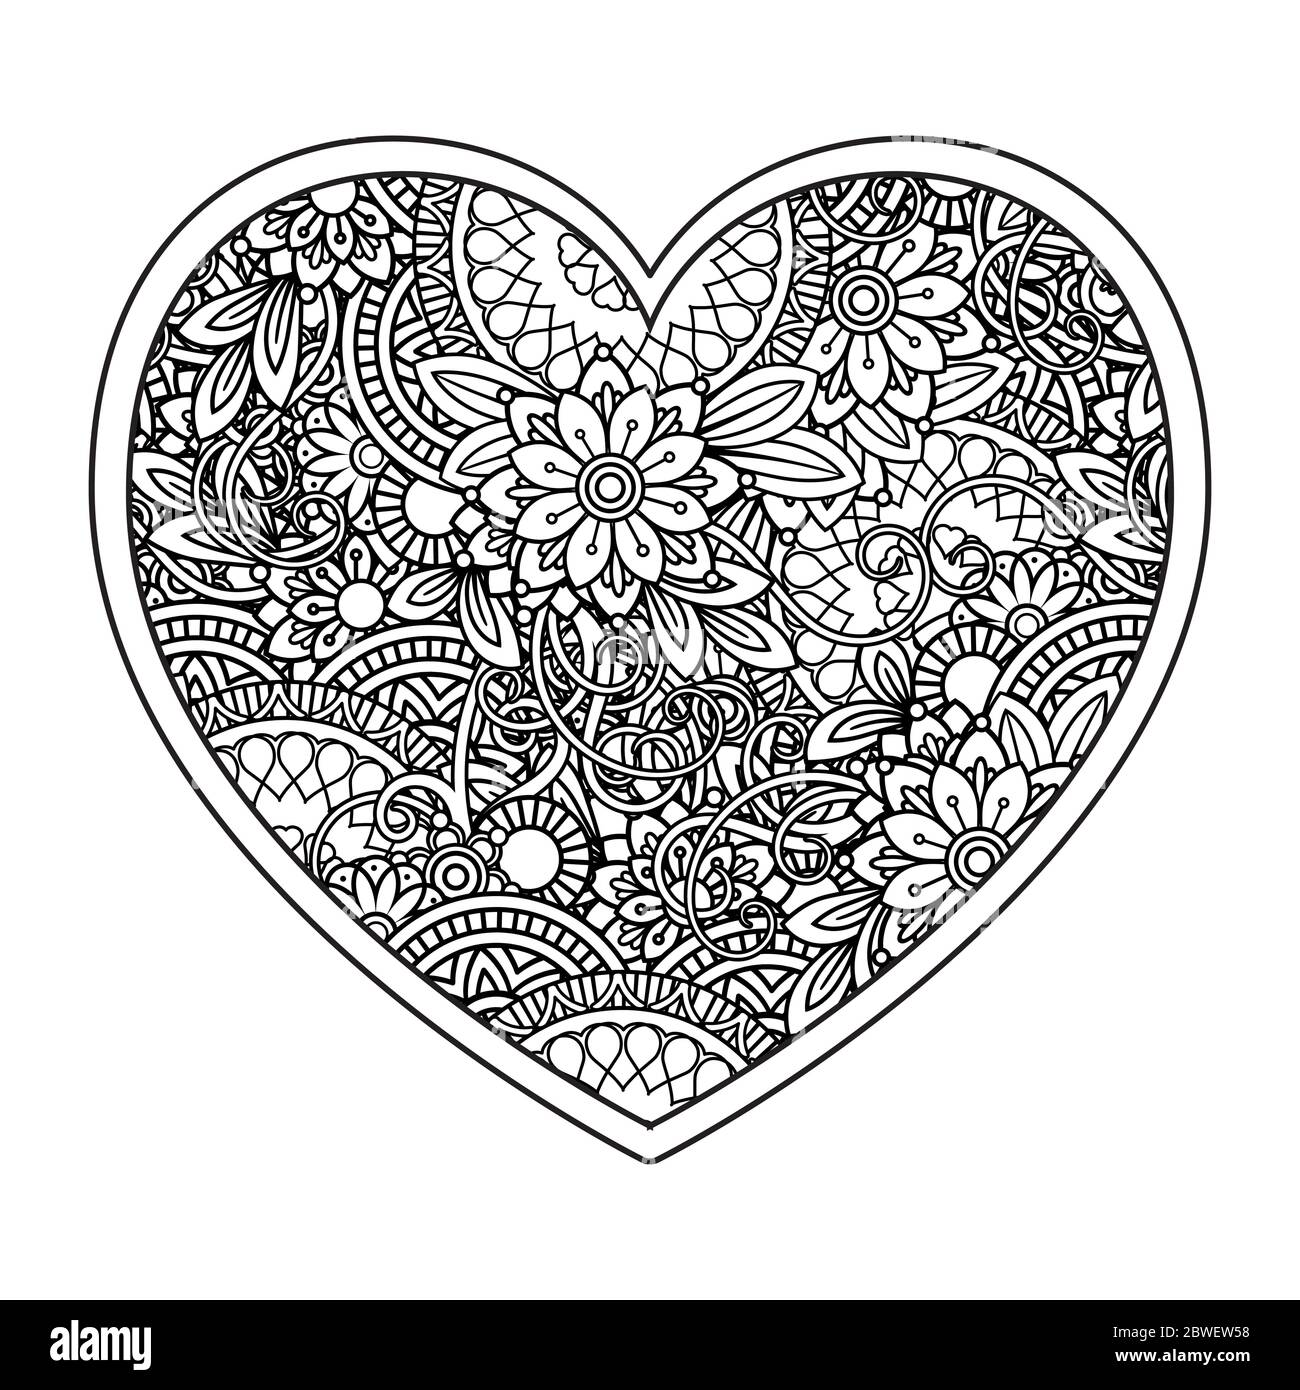 Heart with floral pattern. Valentines day adult coloring page. Vector illustration. Isolated on white background Stock Vector